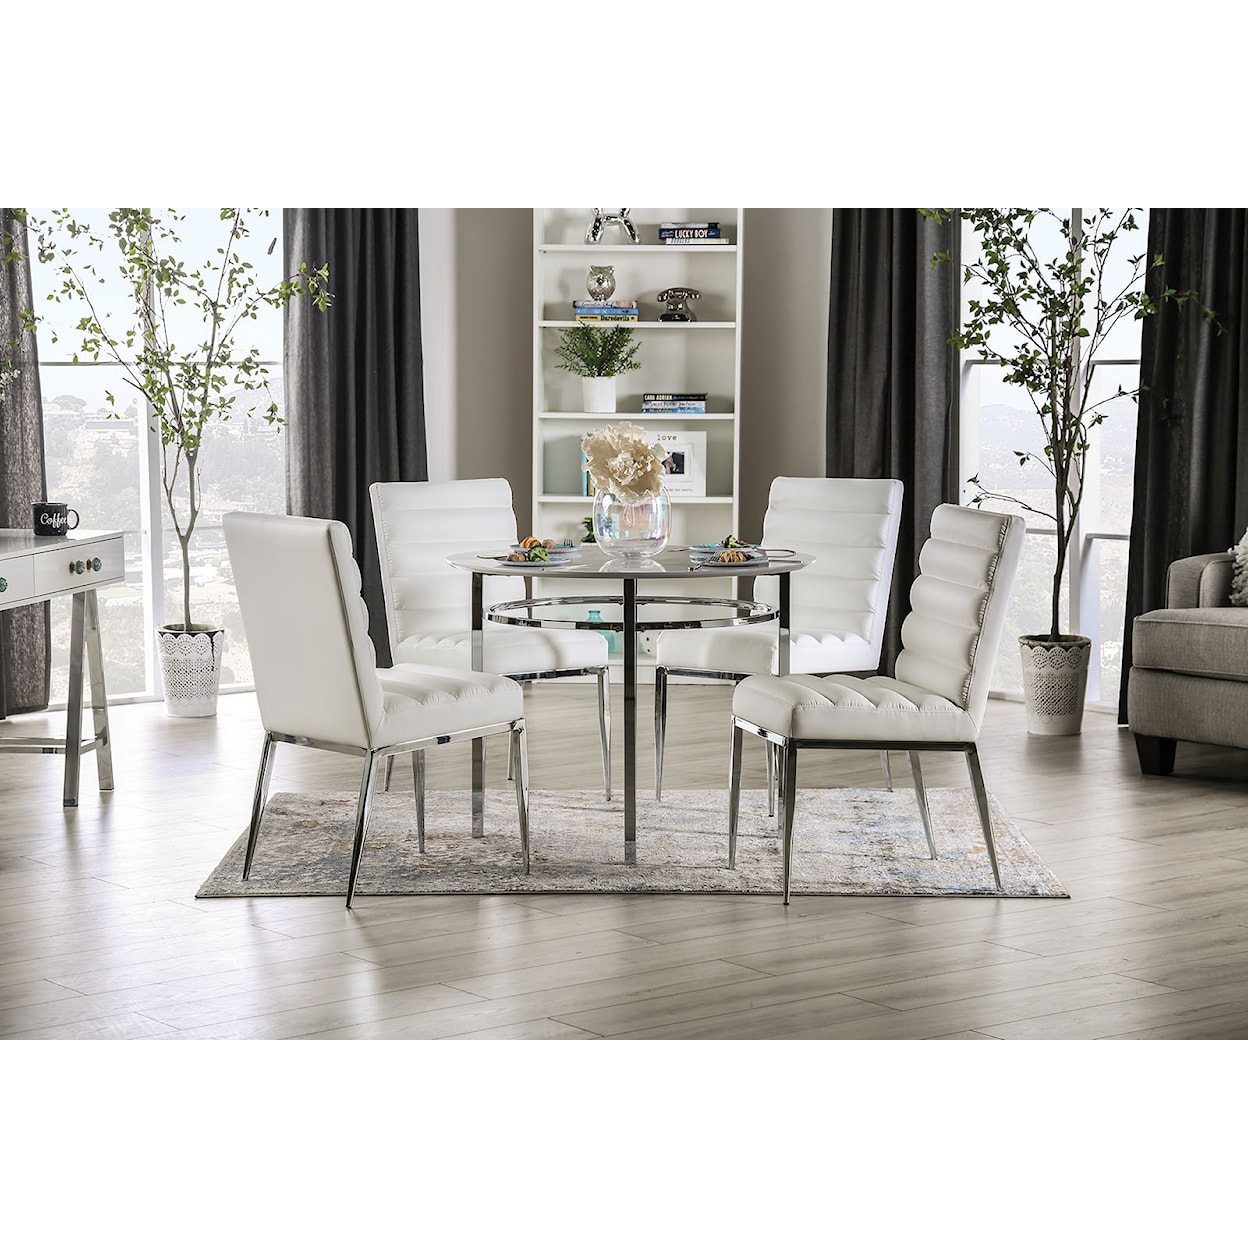 Furniture of America Serena Round Dining Table